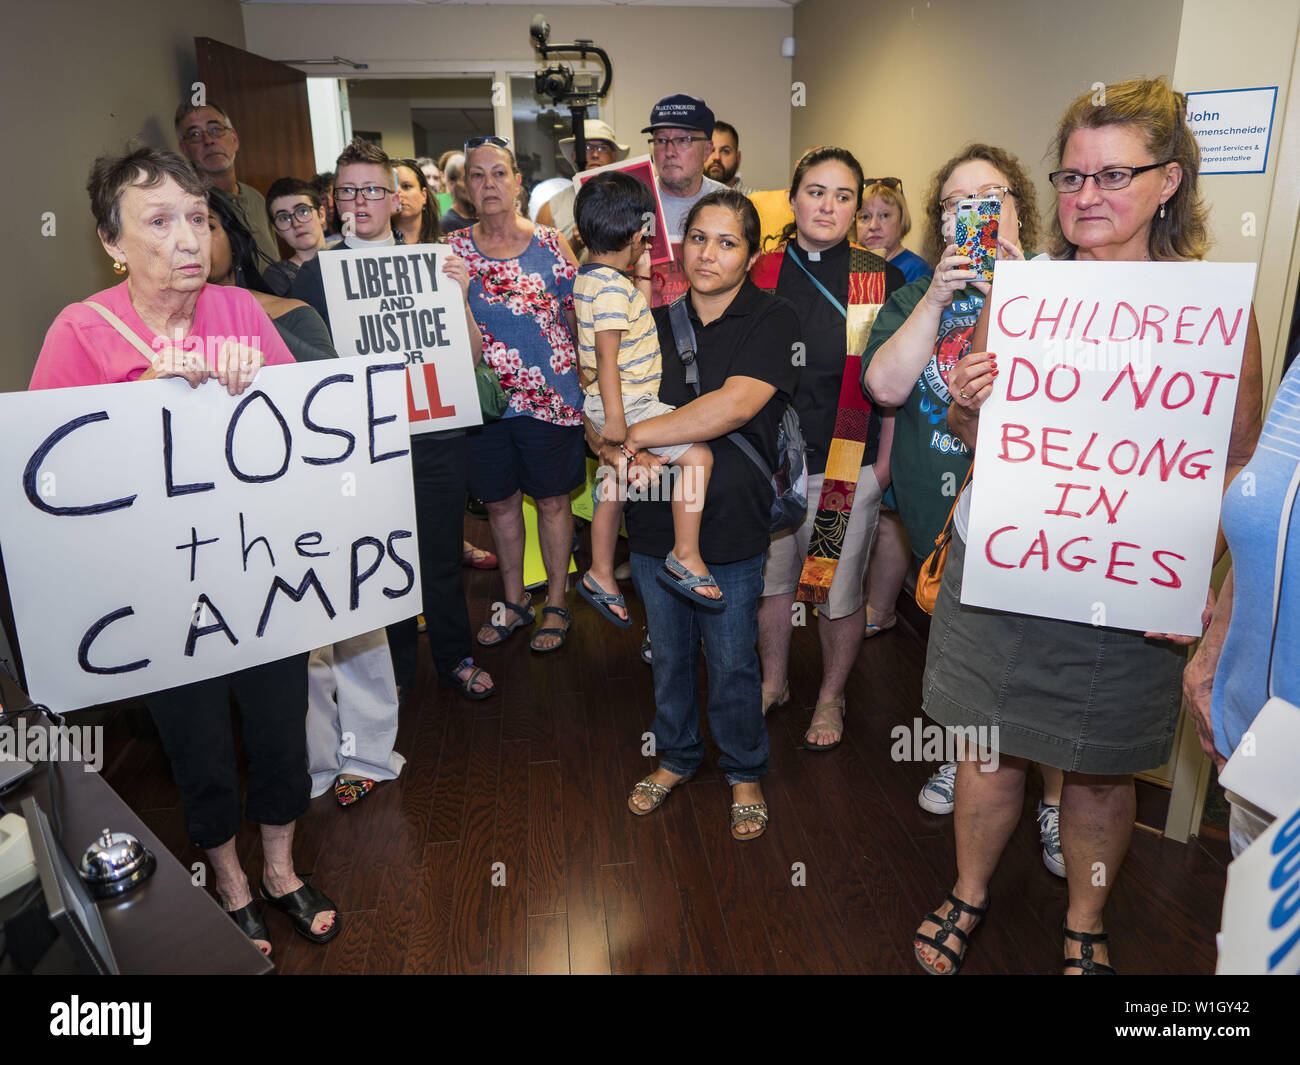 July 2, 2019 - Des Moines, Iowa, U.S - Protesters stand in the lobby of Rep. Cindy Axen's office. About 150 people came to Congresswoman Axne's office in Des Moines Tuesday to protest the treatment of migrant children detained by the US Border Patrol along the US/Mexico border. Axne was not in the office, but a member of Axne's staff took notes and promised to pass people's concerns on to the Congresswoman. Similar protests were held at other congressional offices and Immigration and Customs Enforcement (ICE) detention facilities across the country. (Credit Image: © Jack Kurtz/ZUMA Wire) Stock Photo